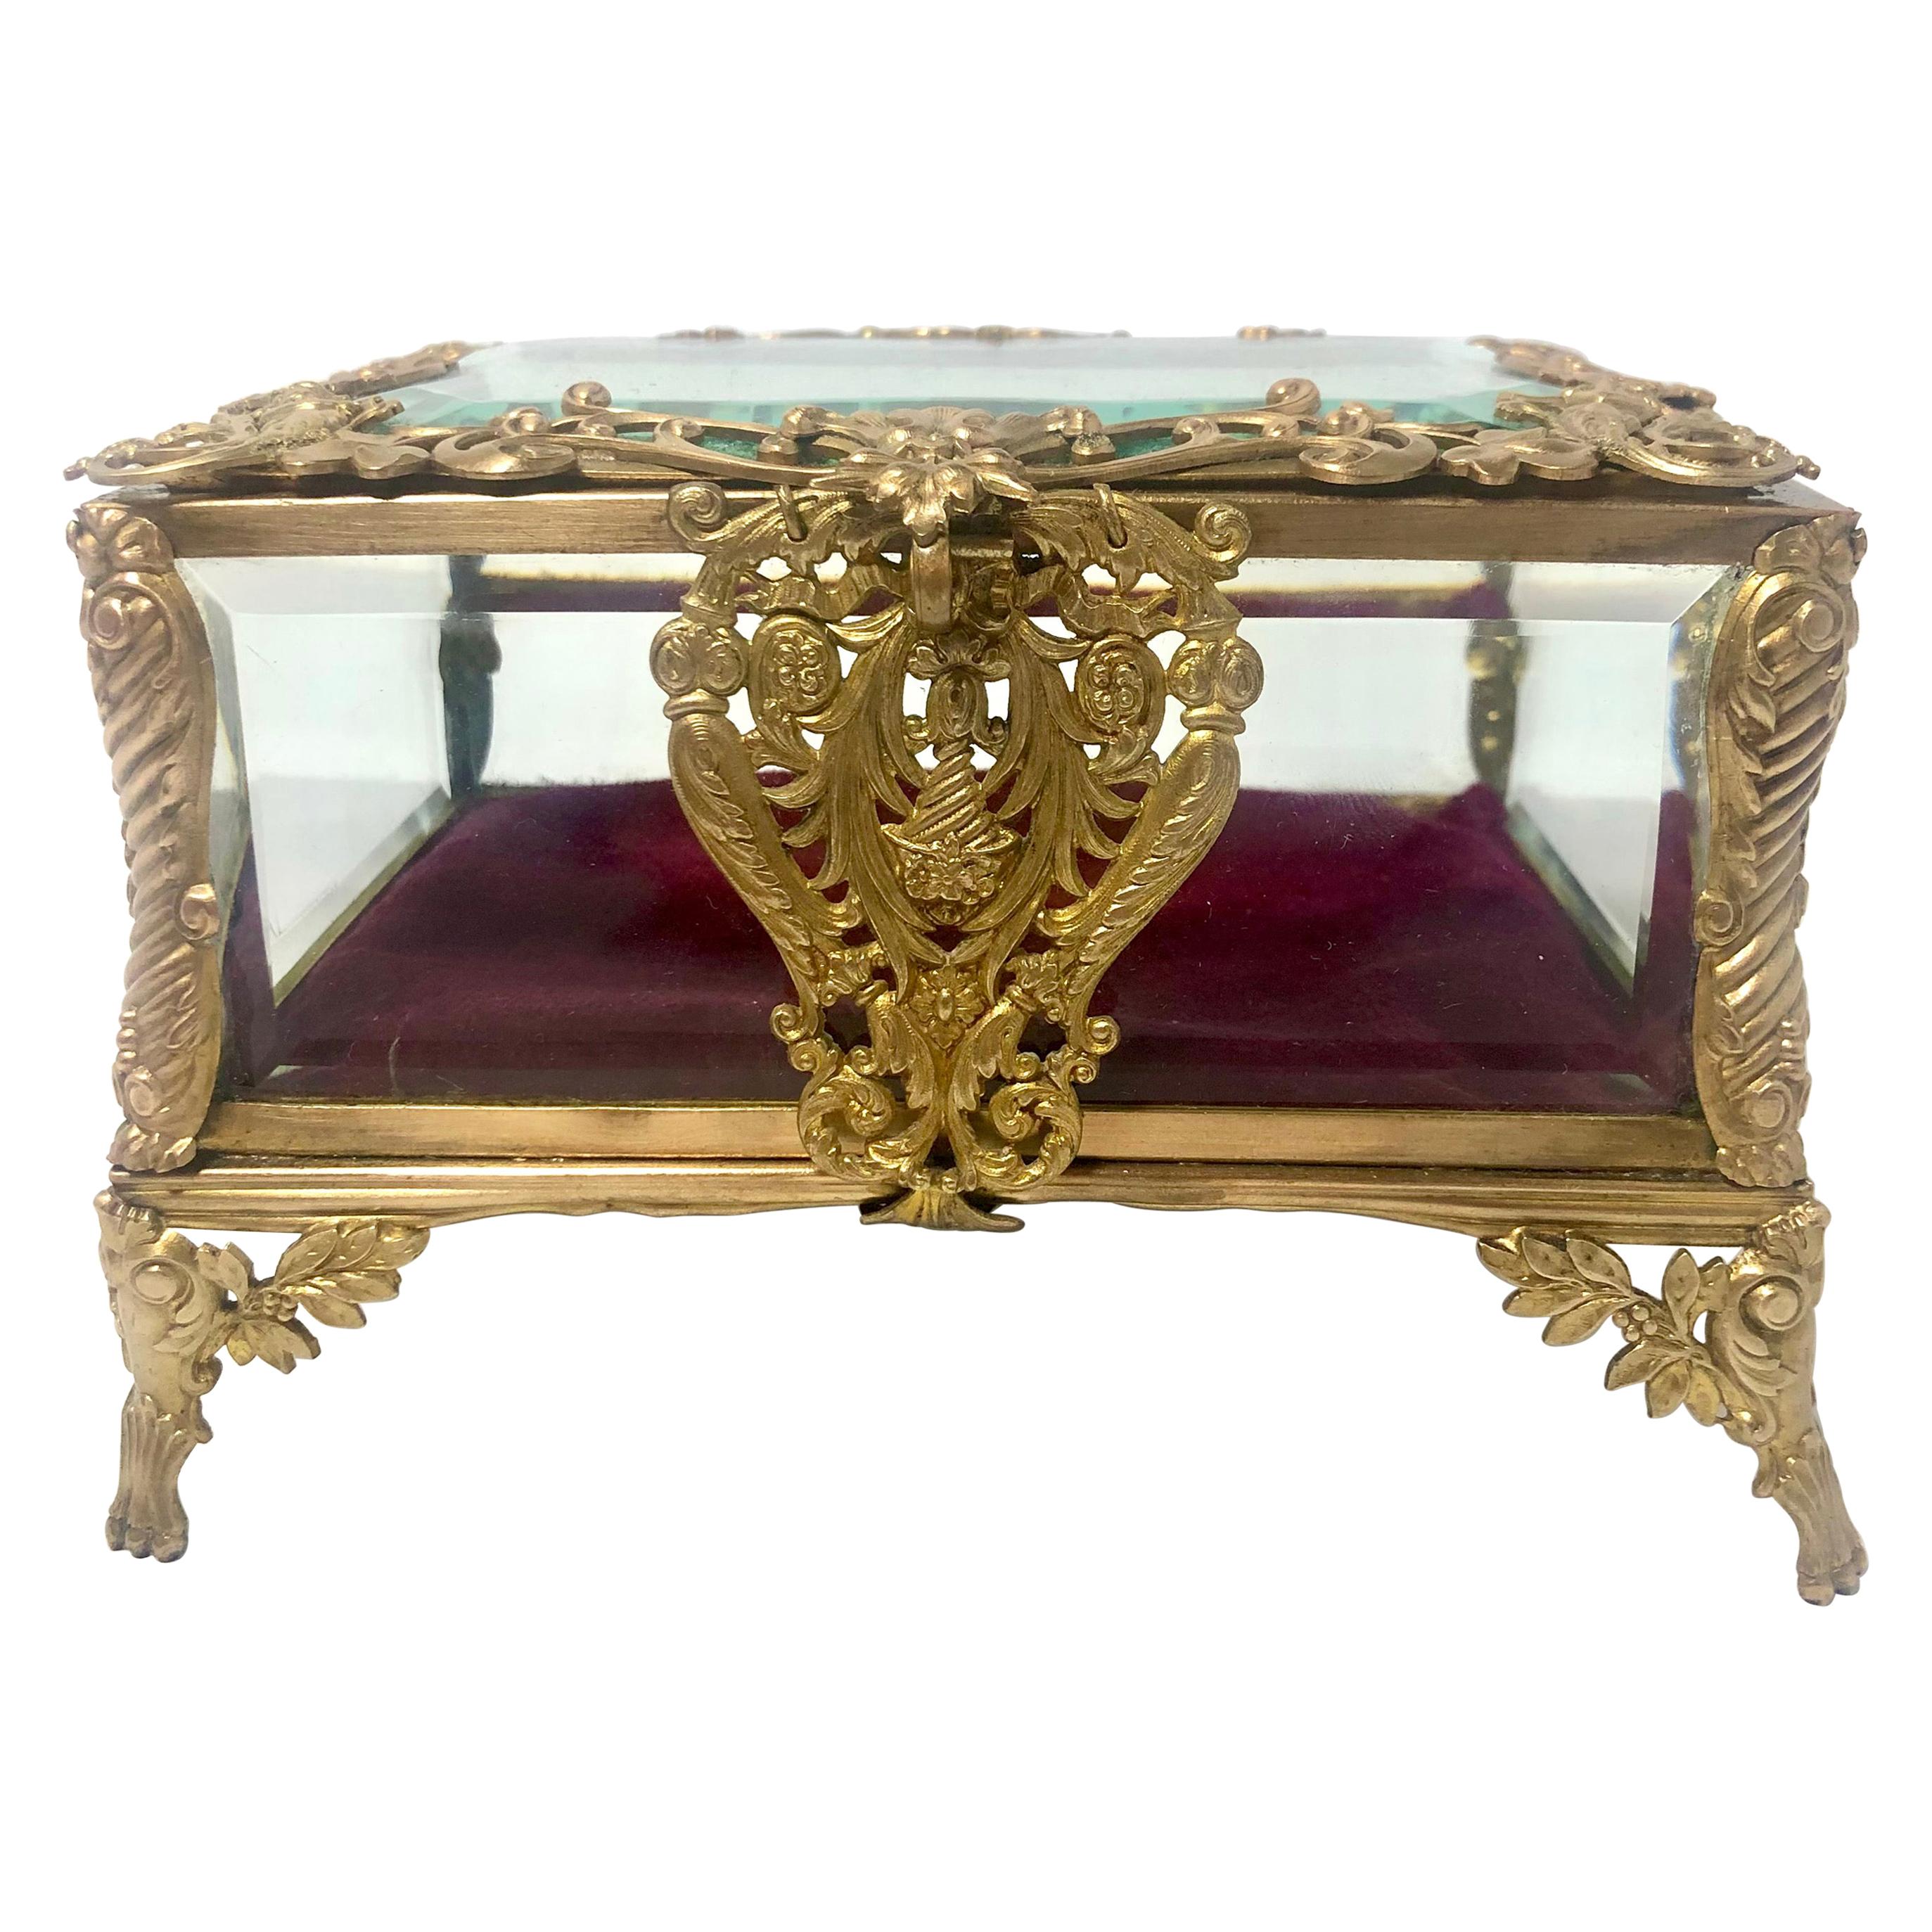 Antique French Art Nouveau Gold Bronze and Crystal Footed Jewel Box, Circa 1900